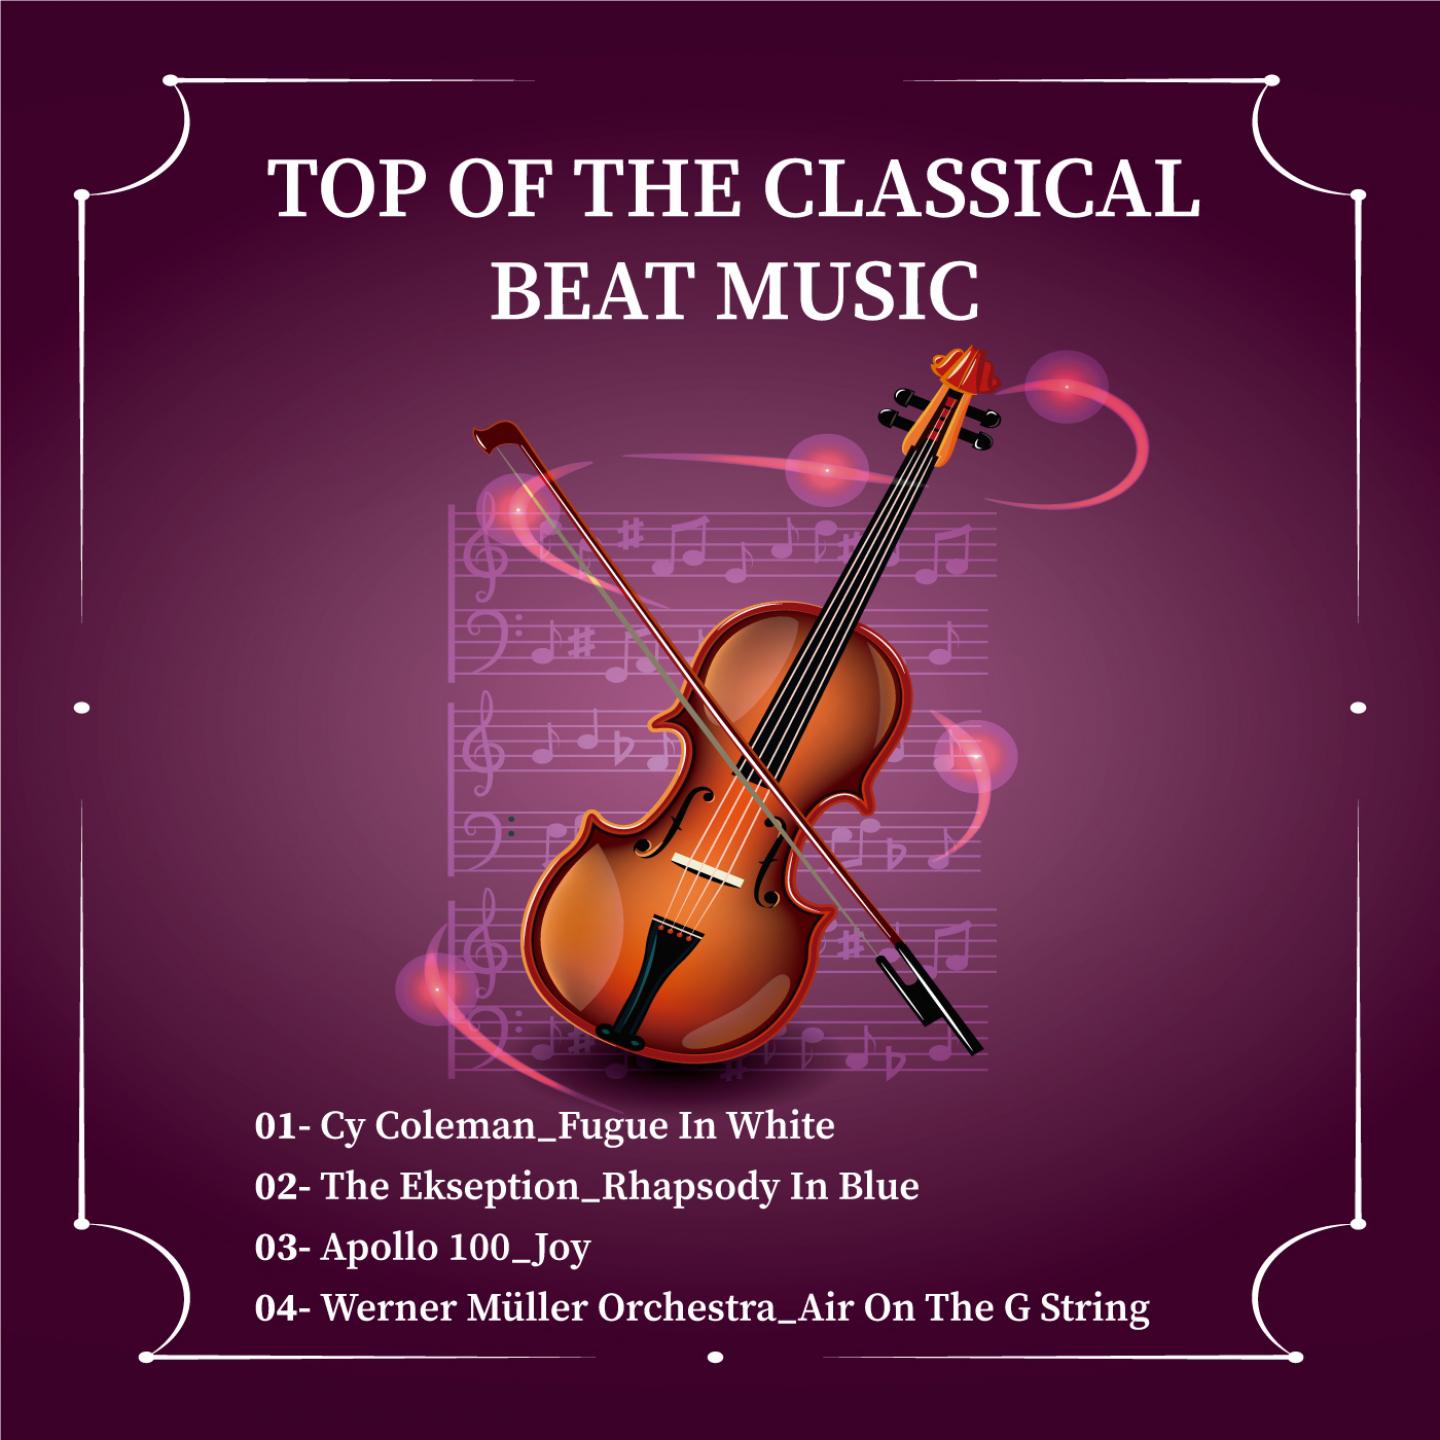 Top of the Classical-Beat Music